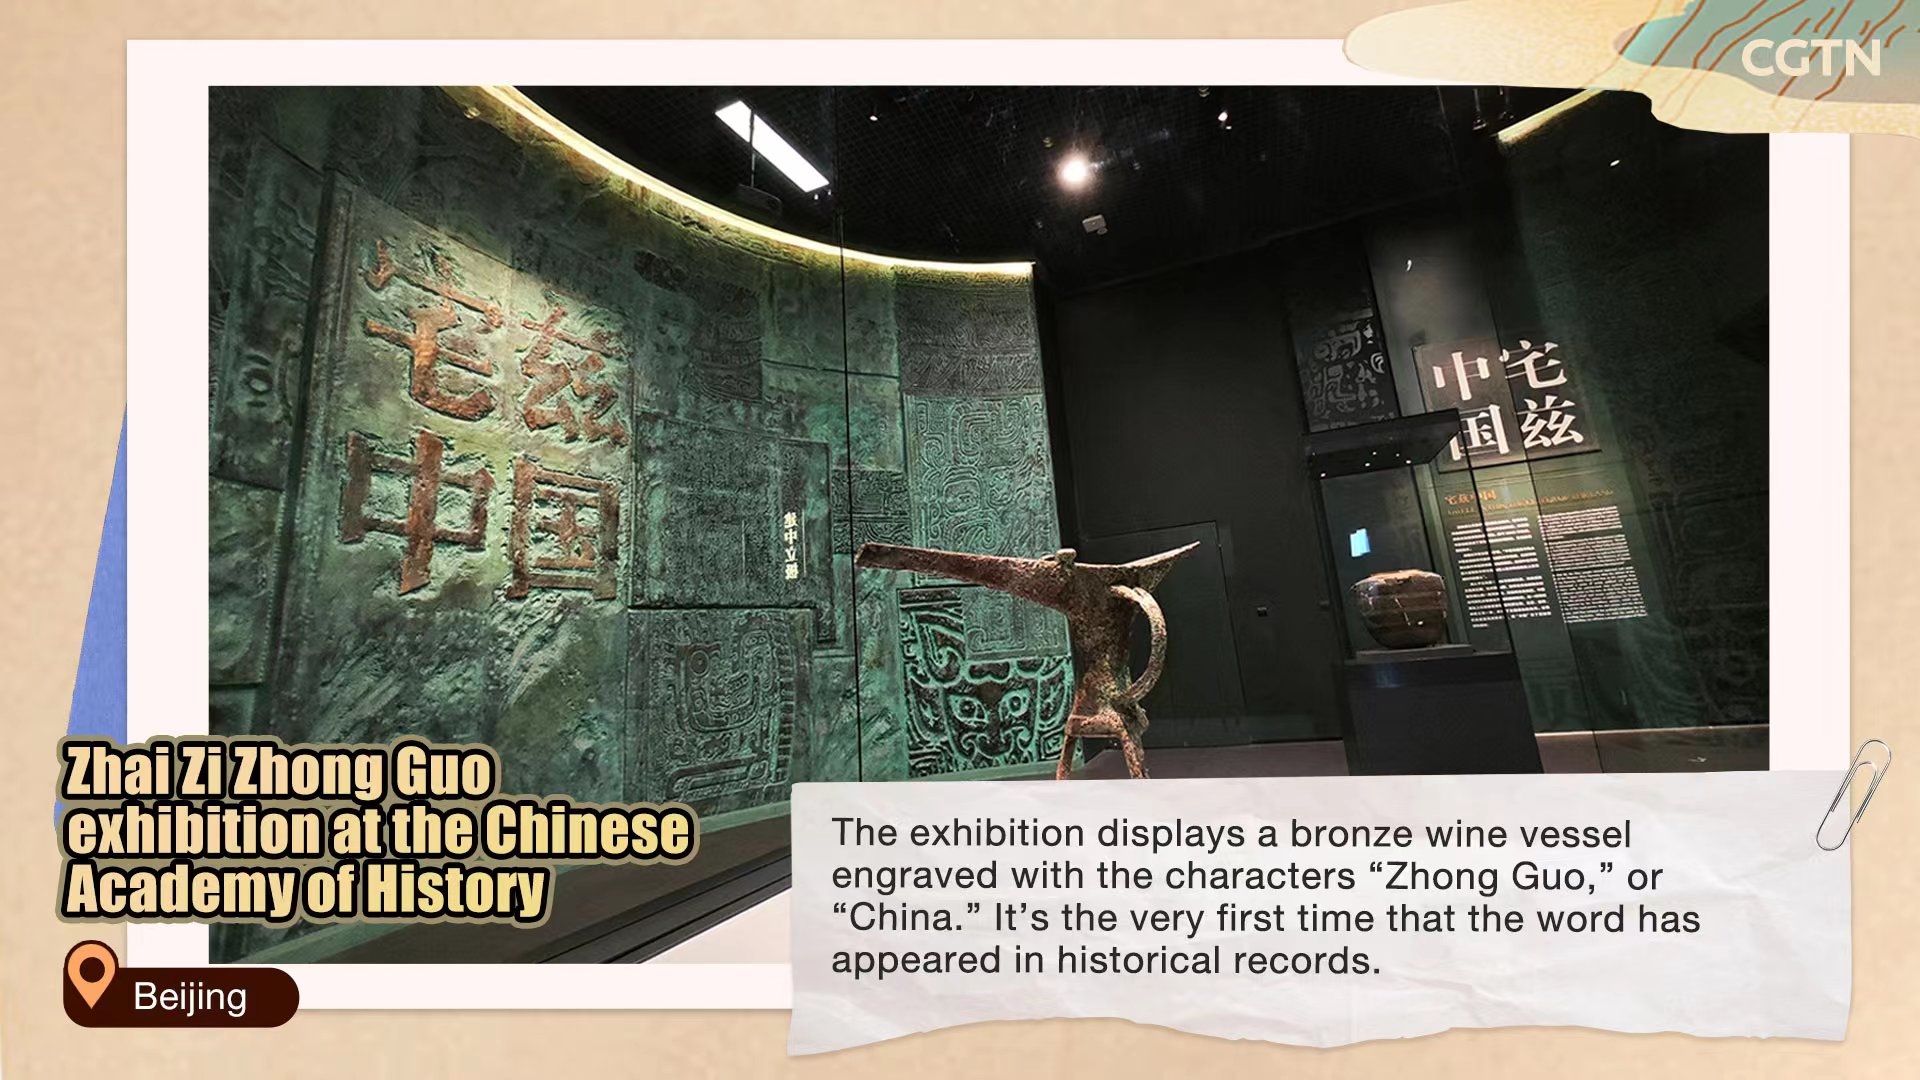 Xi's cultural tour: Exploring Chinese history to better build modern Chinese civilization